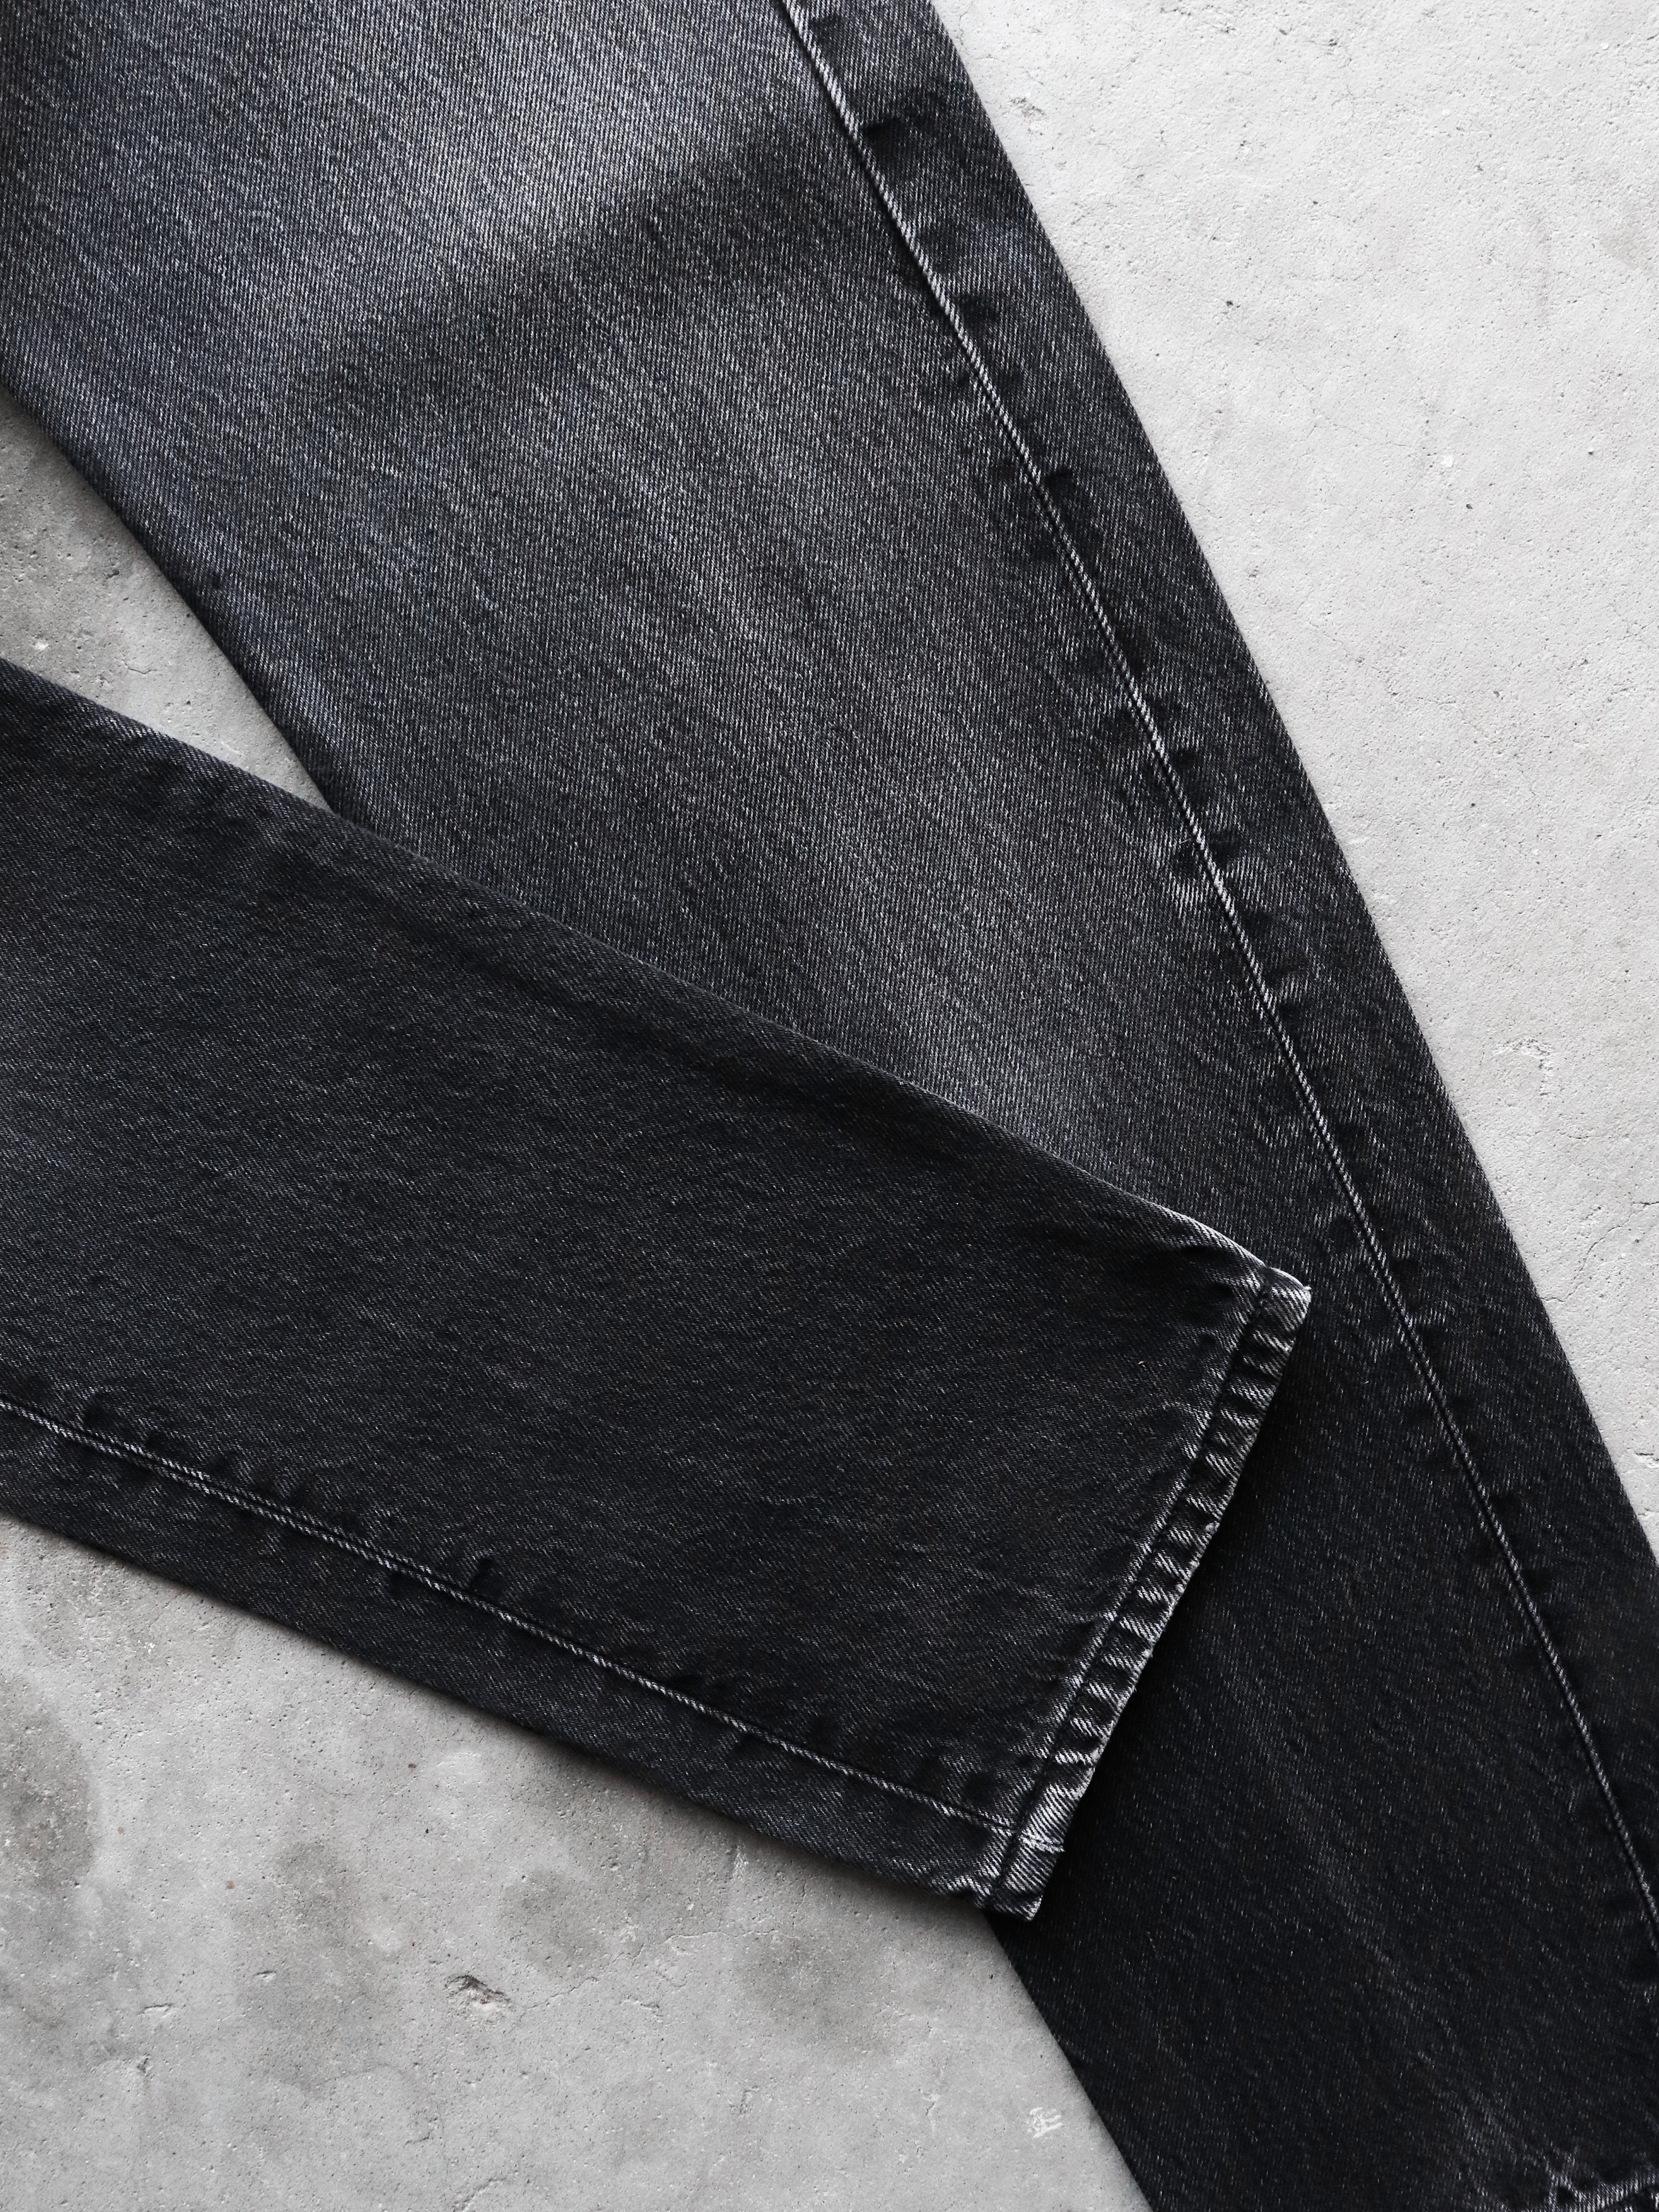 Levi's 501 Stained Thrashed Jeans - 1990s – UNSOUND RAGS